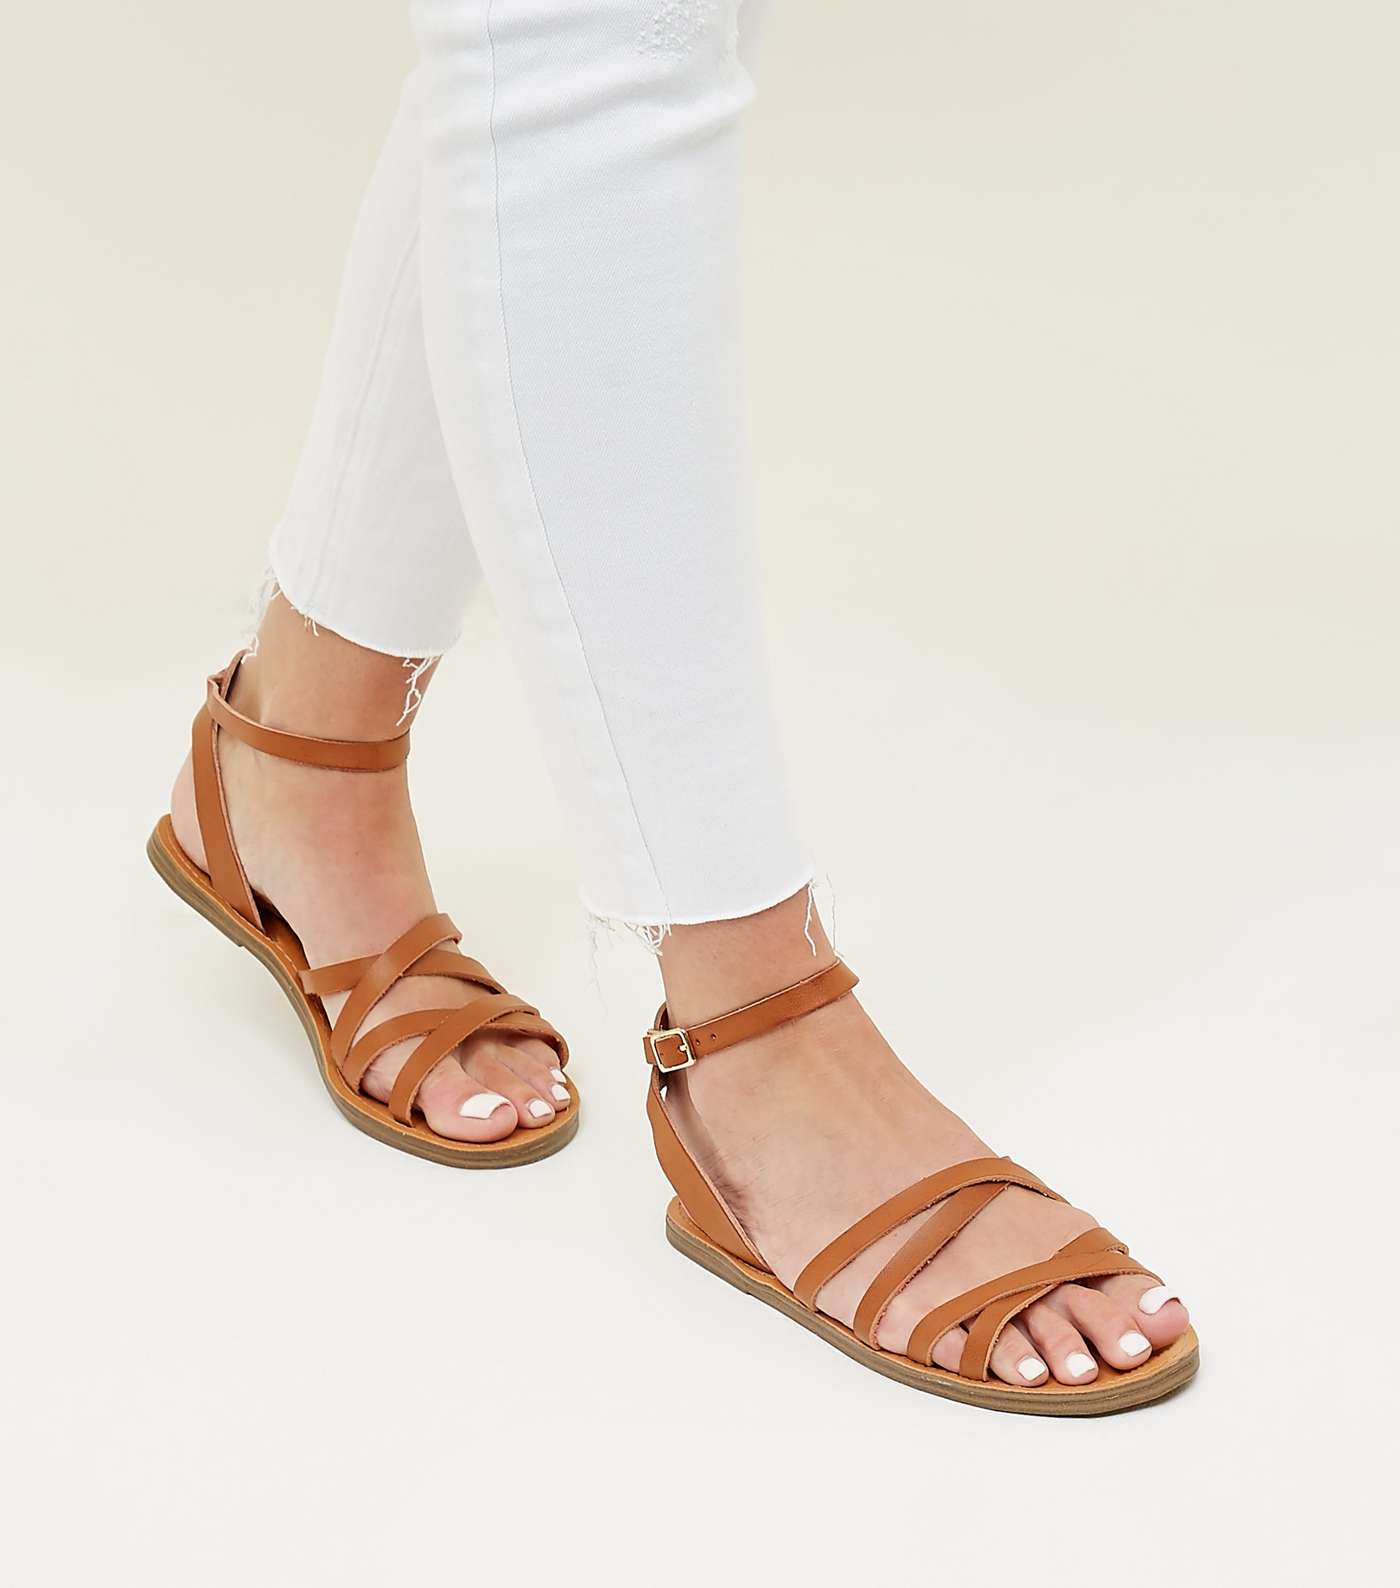 Tan Leather-Look Strappy Gladiator Flat Sandals Image 2